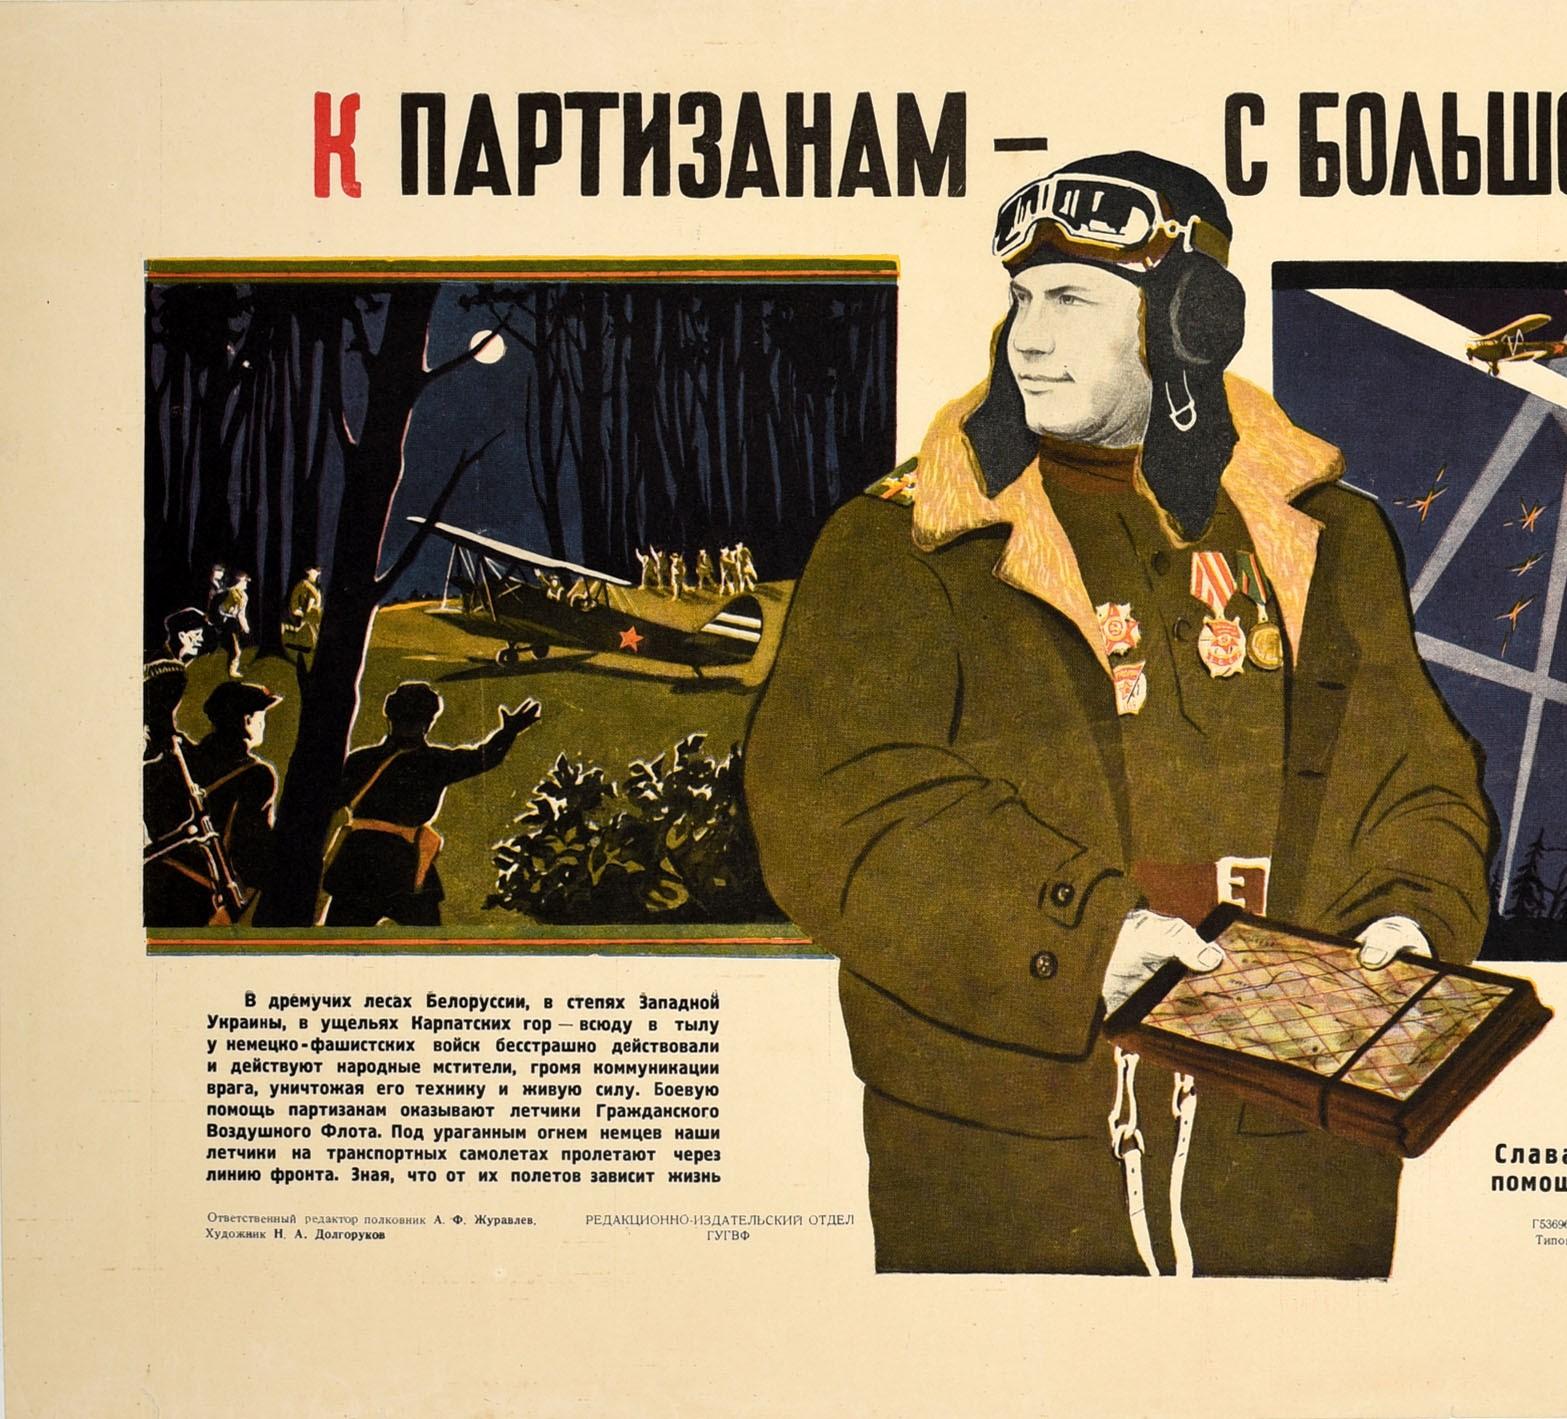 Original vintage Soviet World War Two propaganda poster featuring a dynamic design depicting a Soviet air force pilot with medals on his uniform below a thick coat, wearing flying goggles and holding a map between two scenes in the background